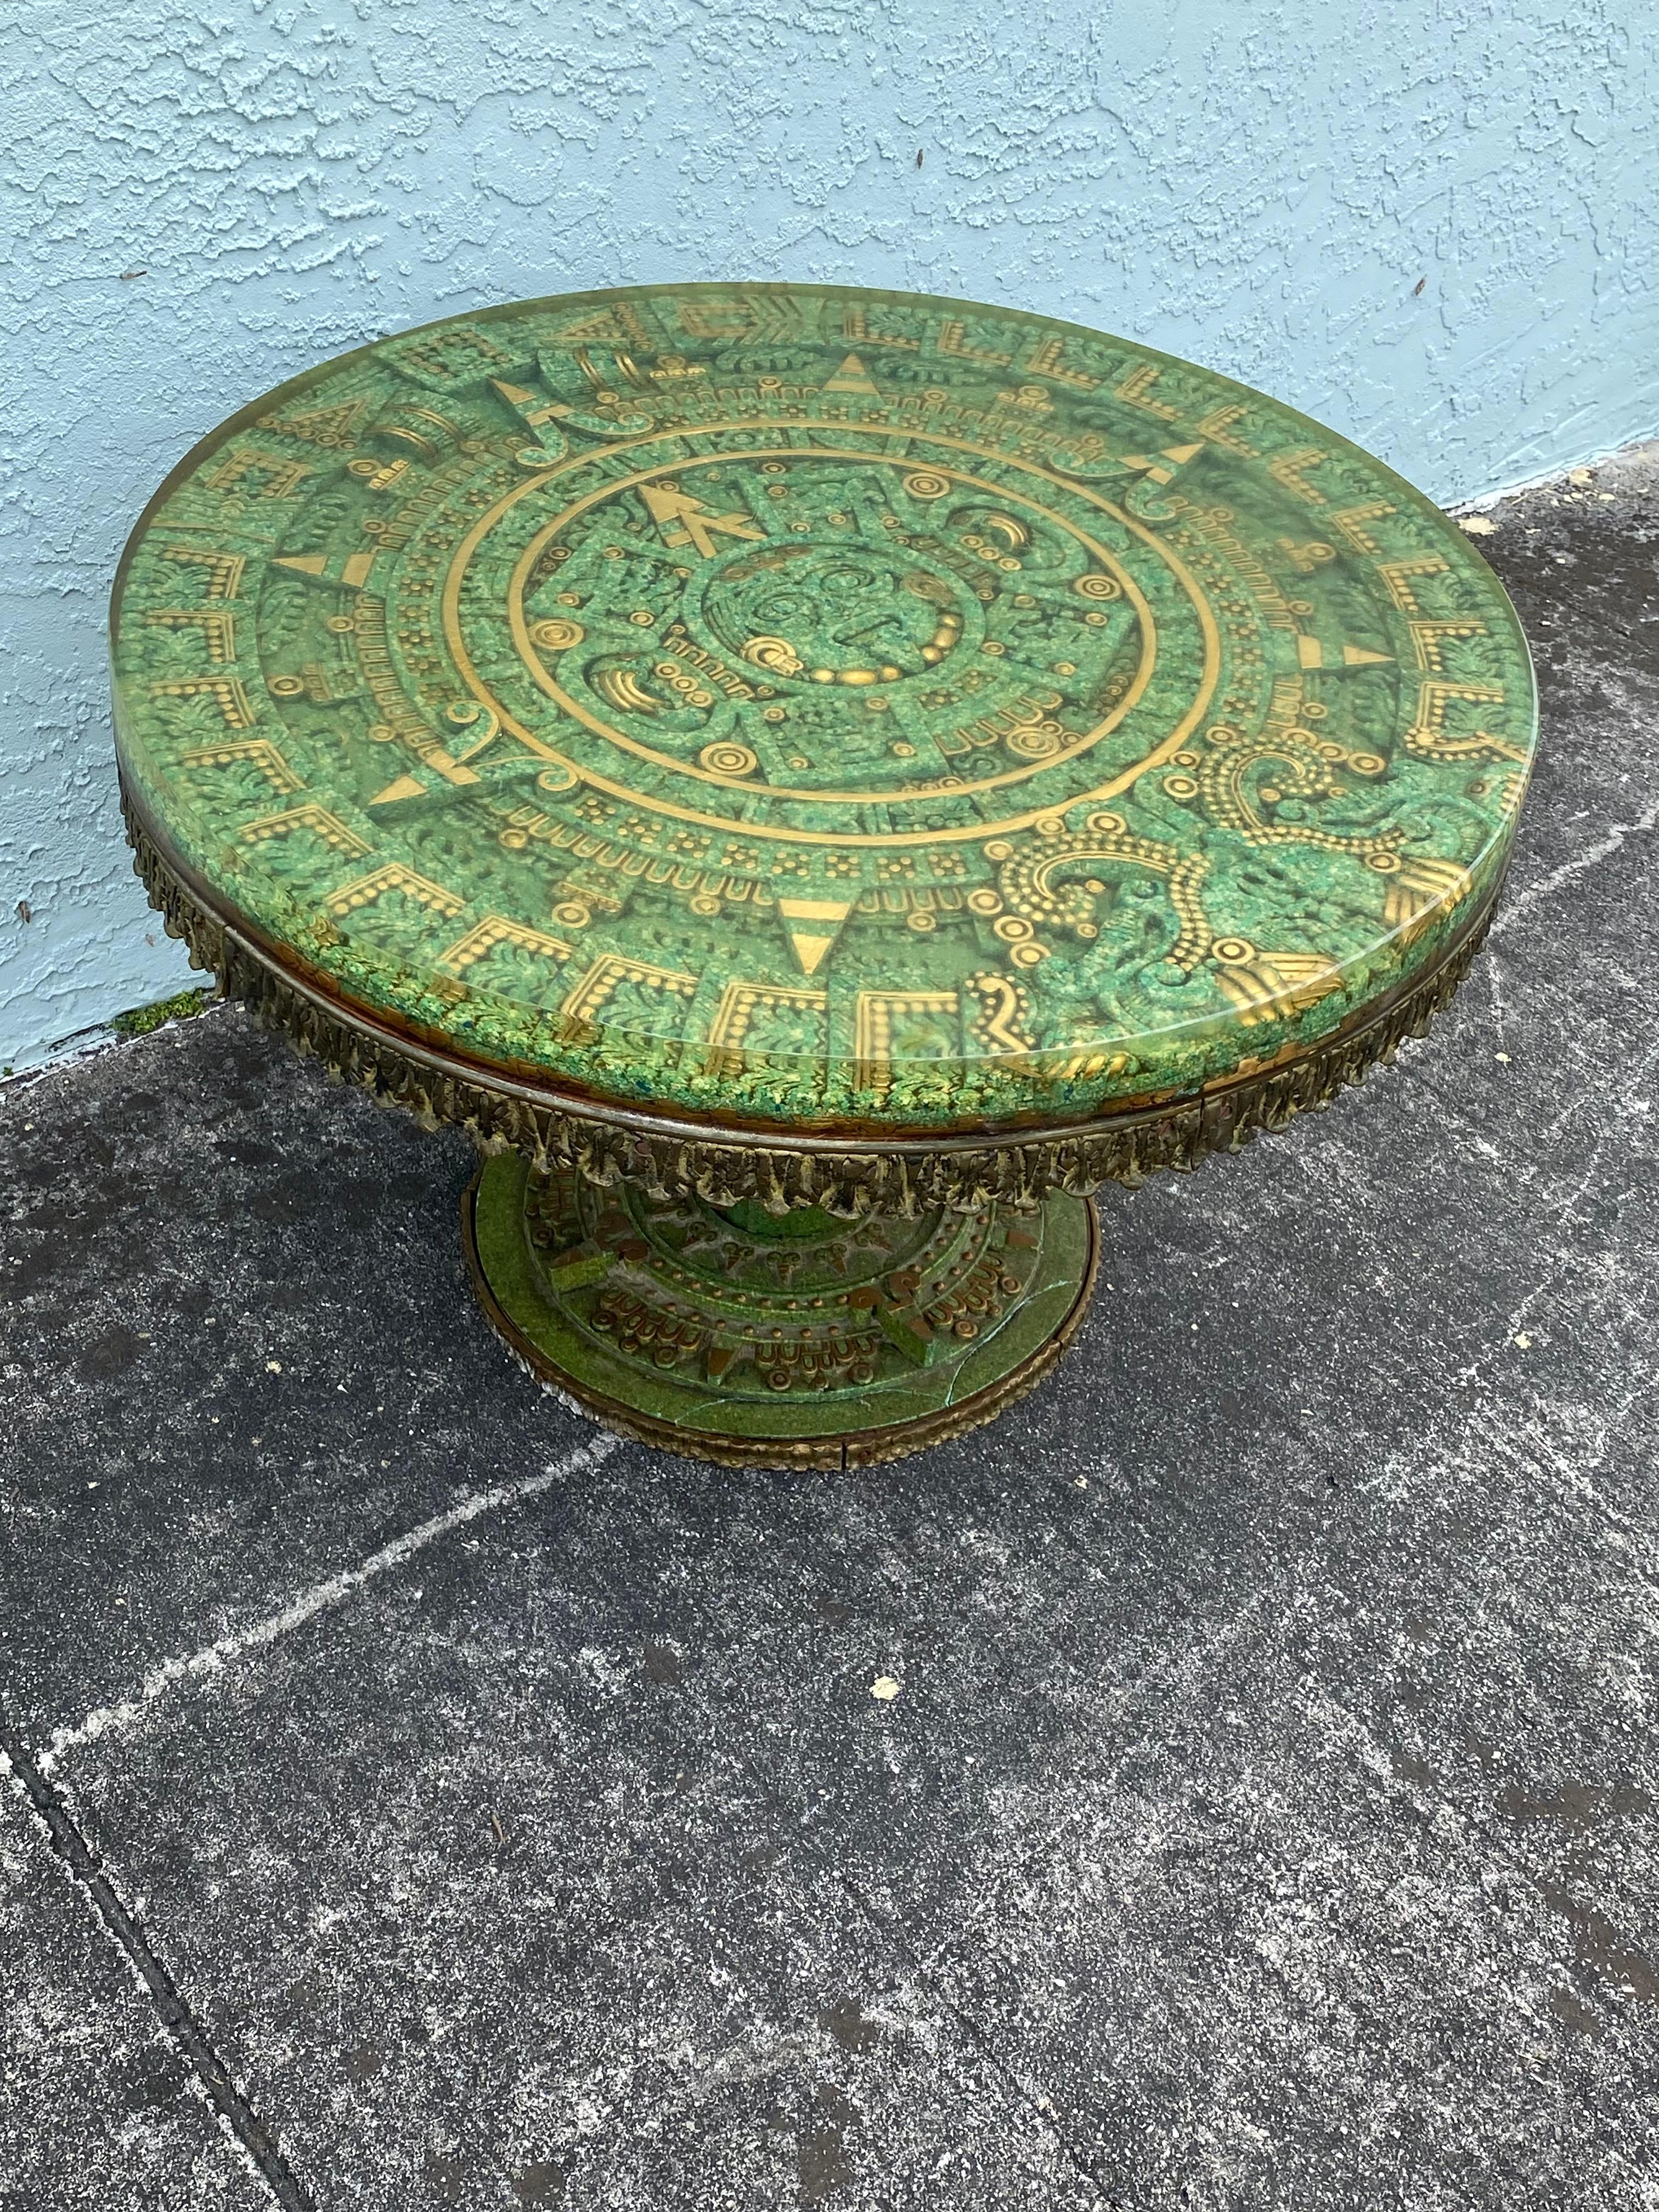 Sculpted Inlay Malachite Brutalist Bronze Wood Stone Resin Aztec Circular Table  For Sale 33